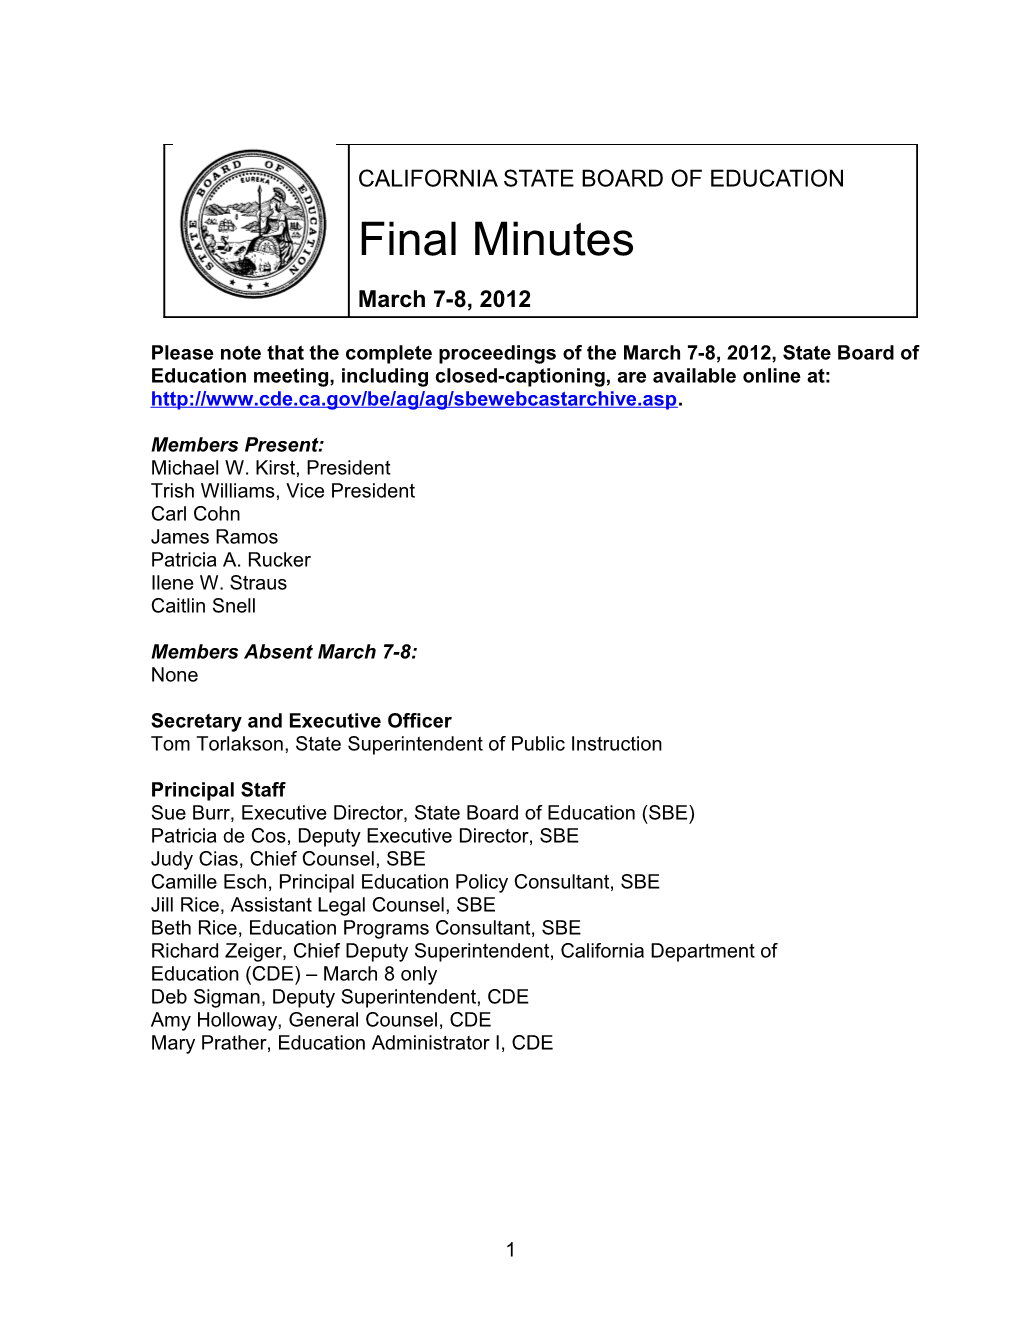 Final Minutes for March 7-8, 2012 - SBE Minutes (CA State Board of Education)